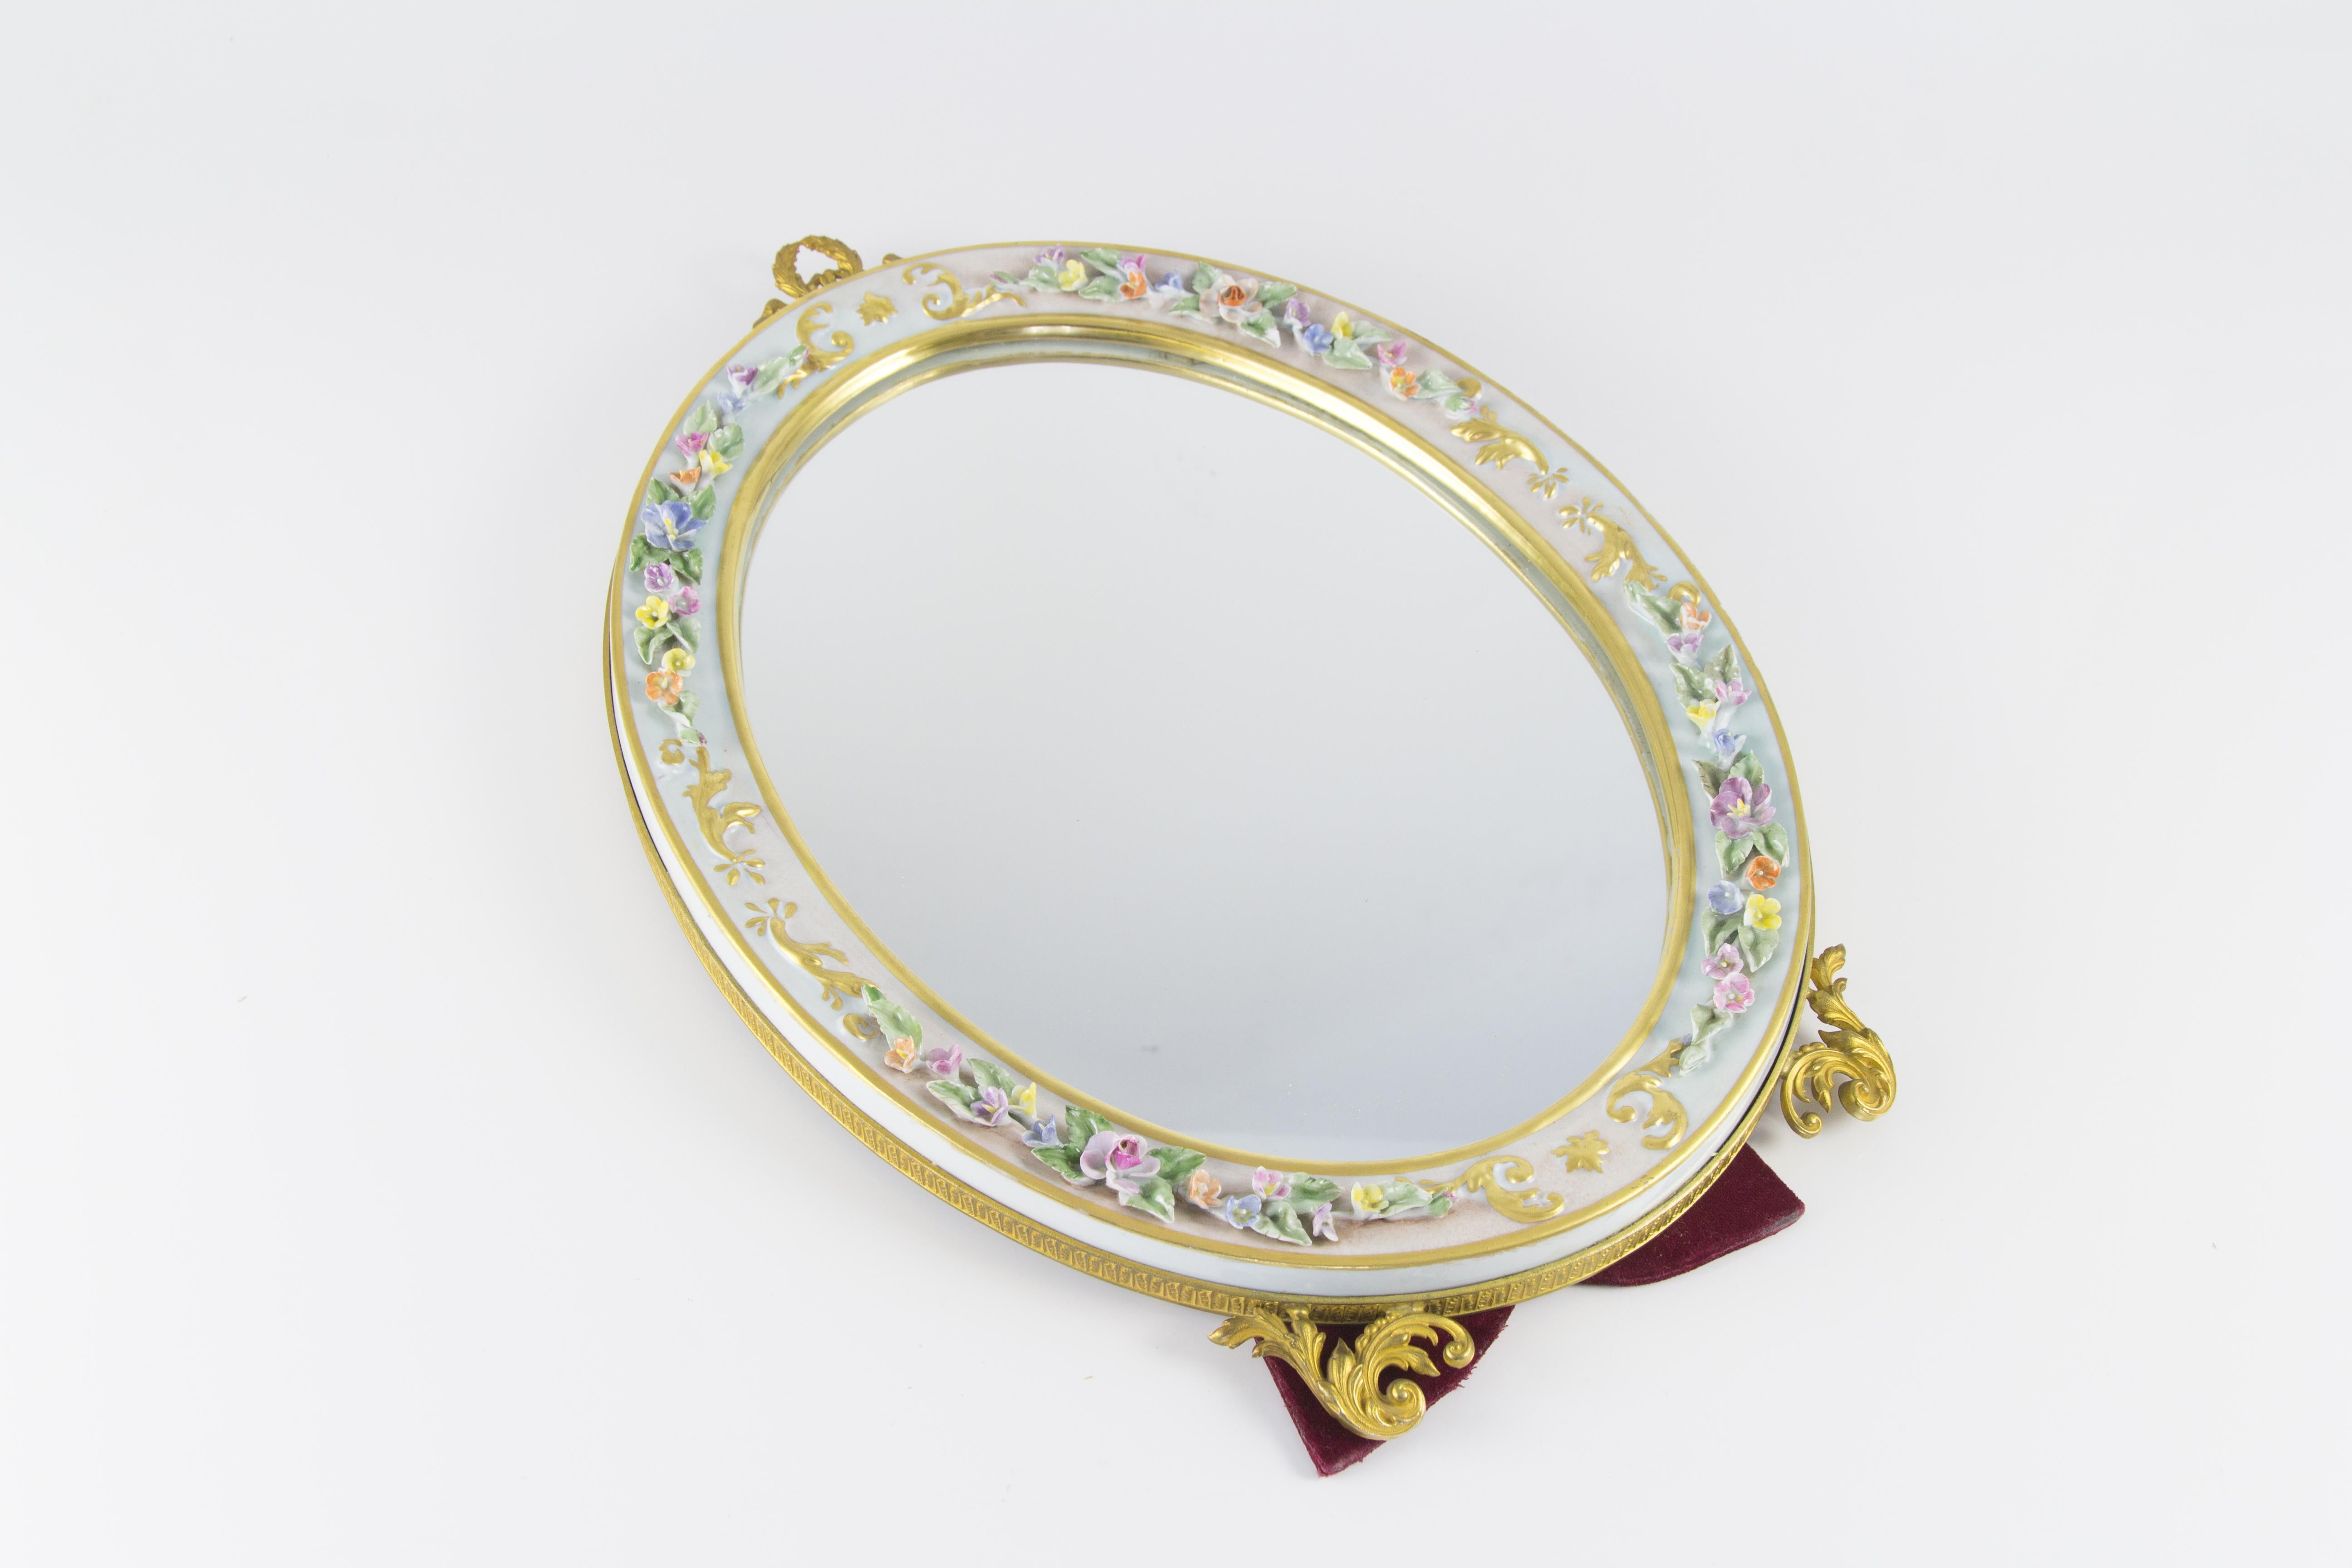 Metal Oval Table Mirror with Floral Porcelain Frame, Italy, 1950s For Sale